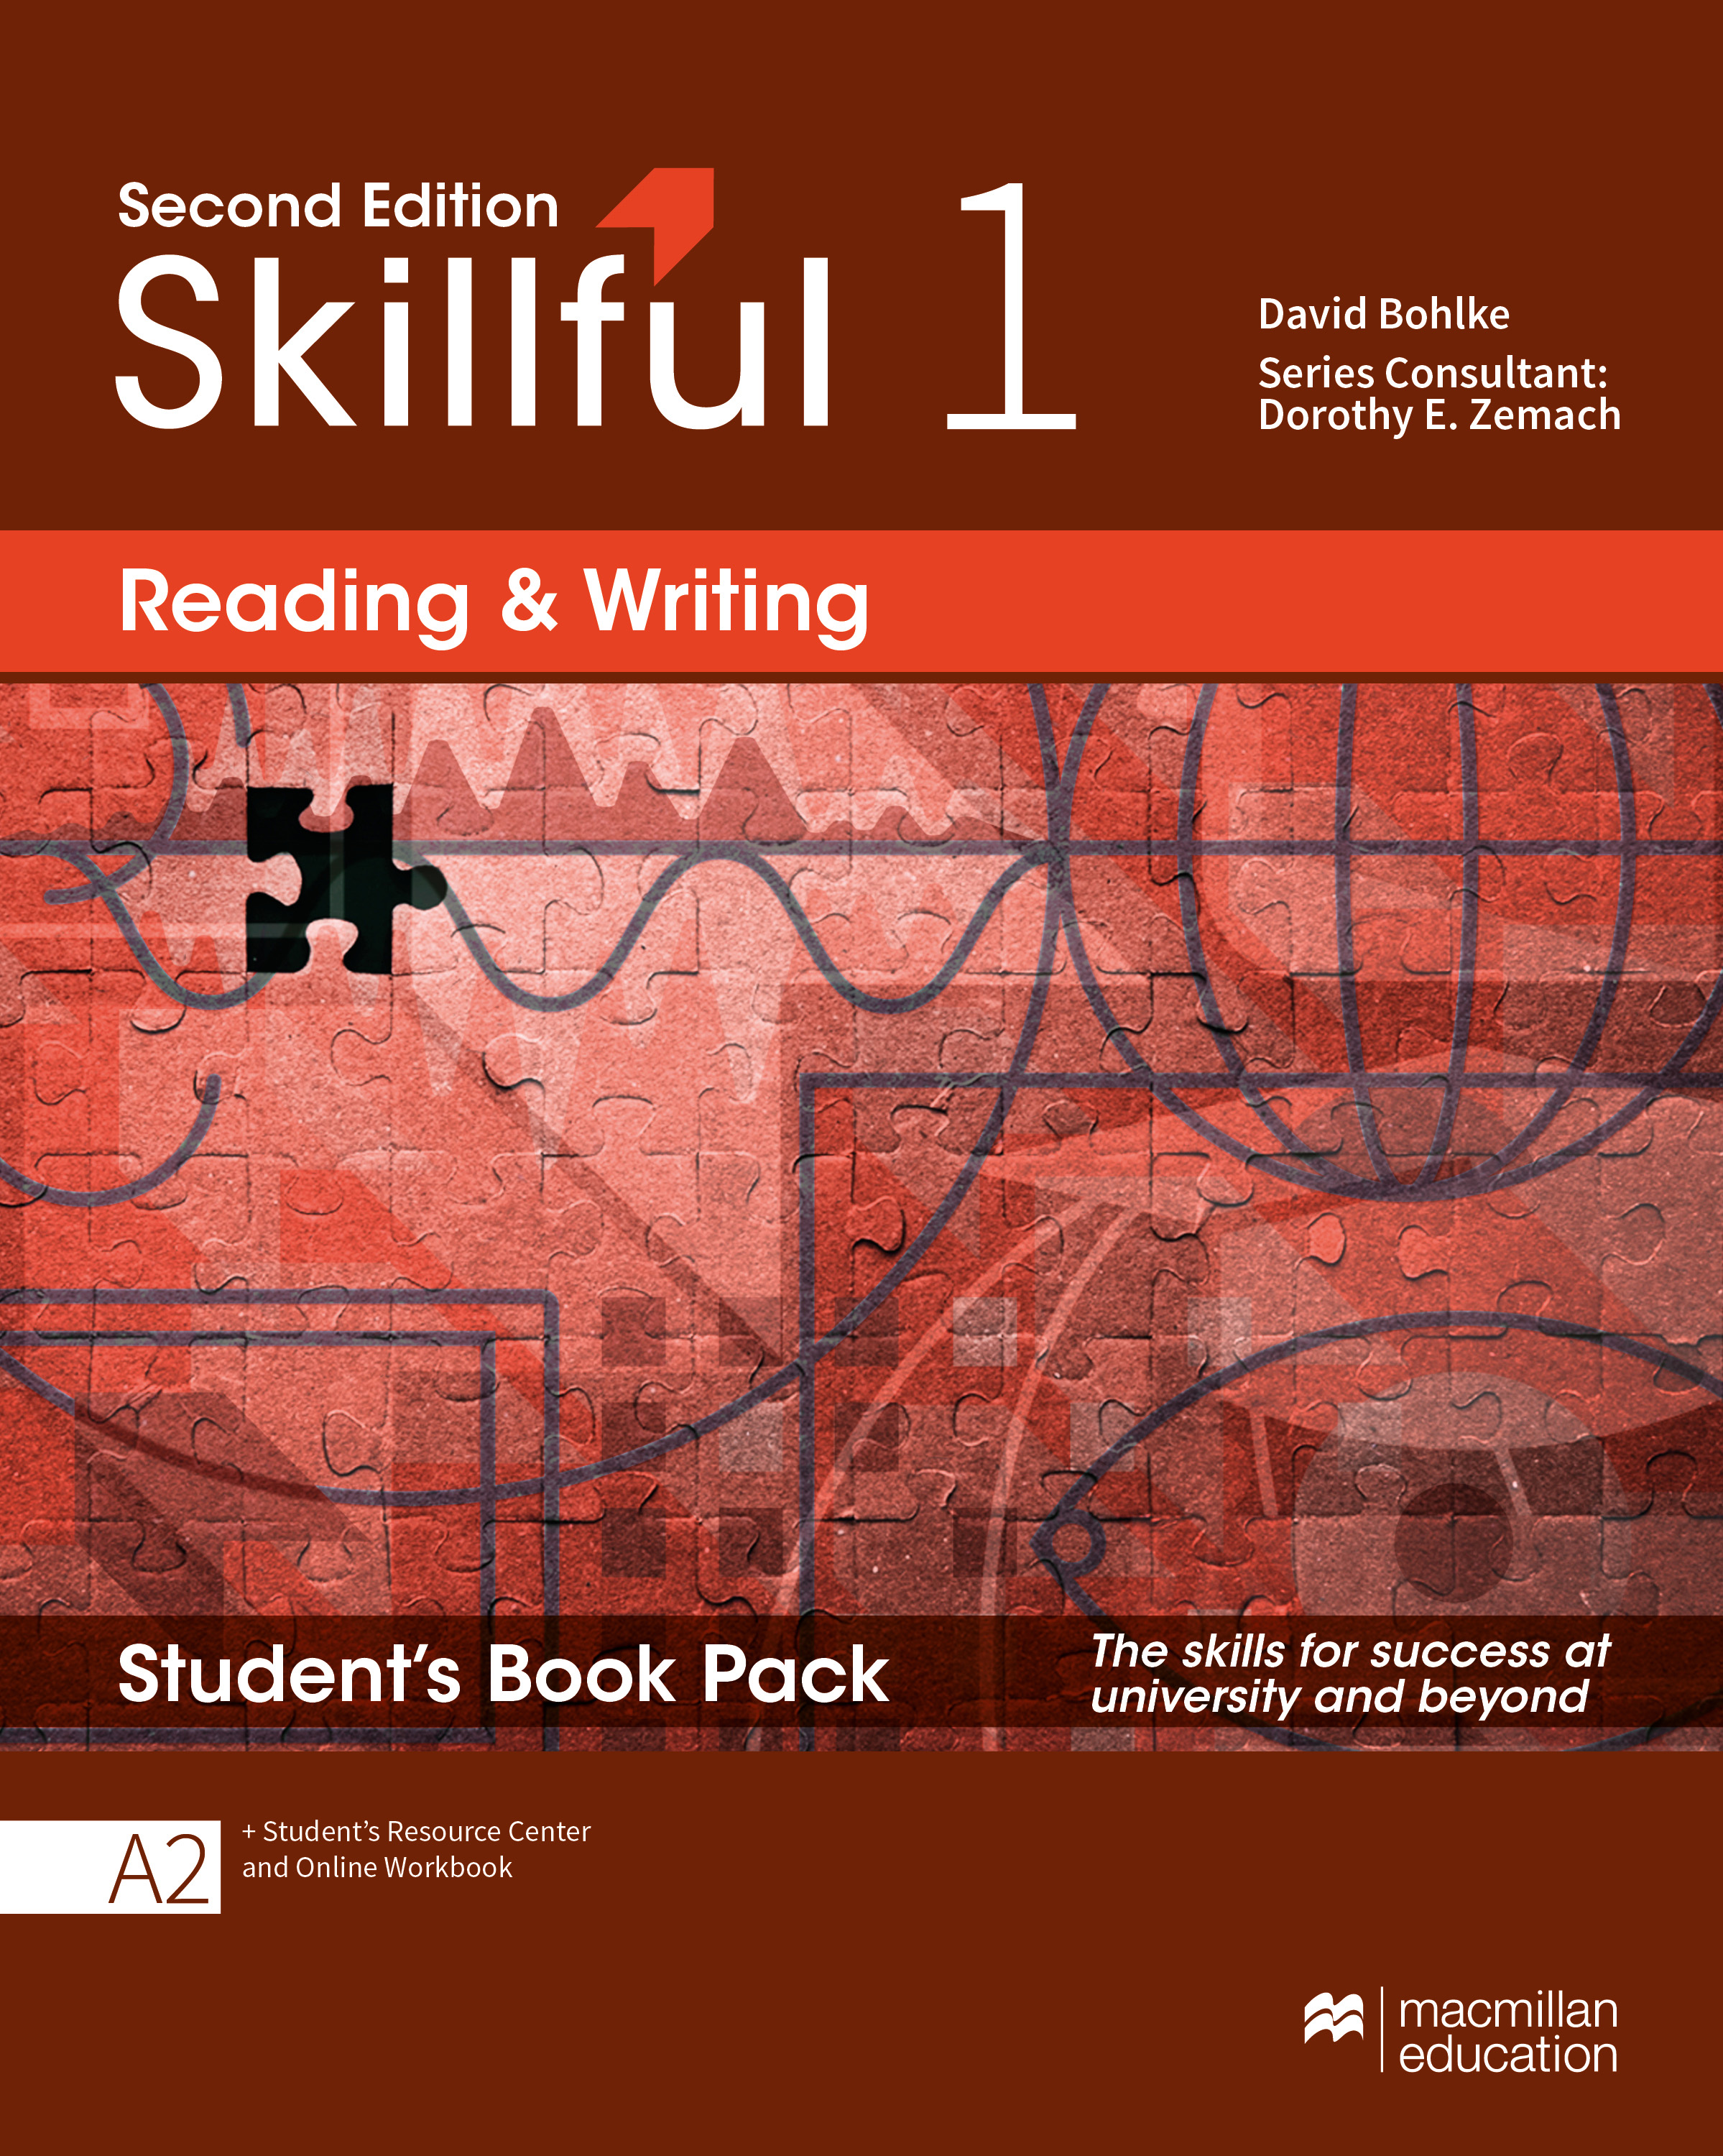 Skillful t. Skillful 1 reading and writing. Skillful Macmillan. Skillful 1. Skillful reading and writing students book 1.